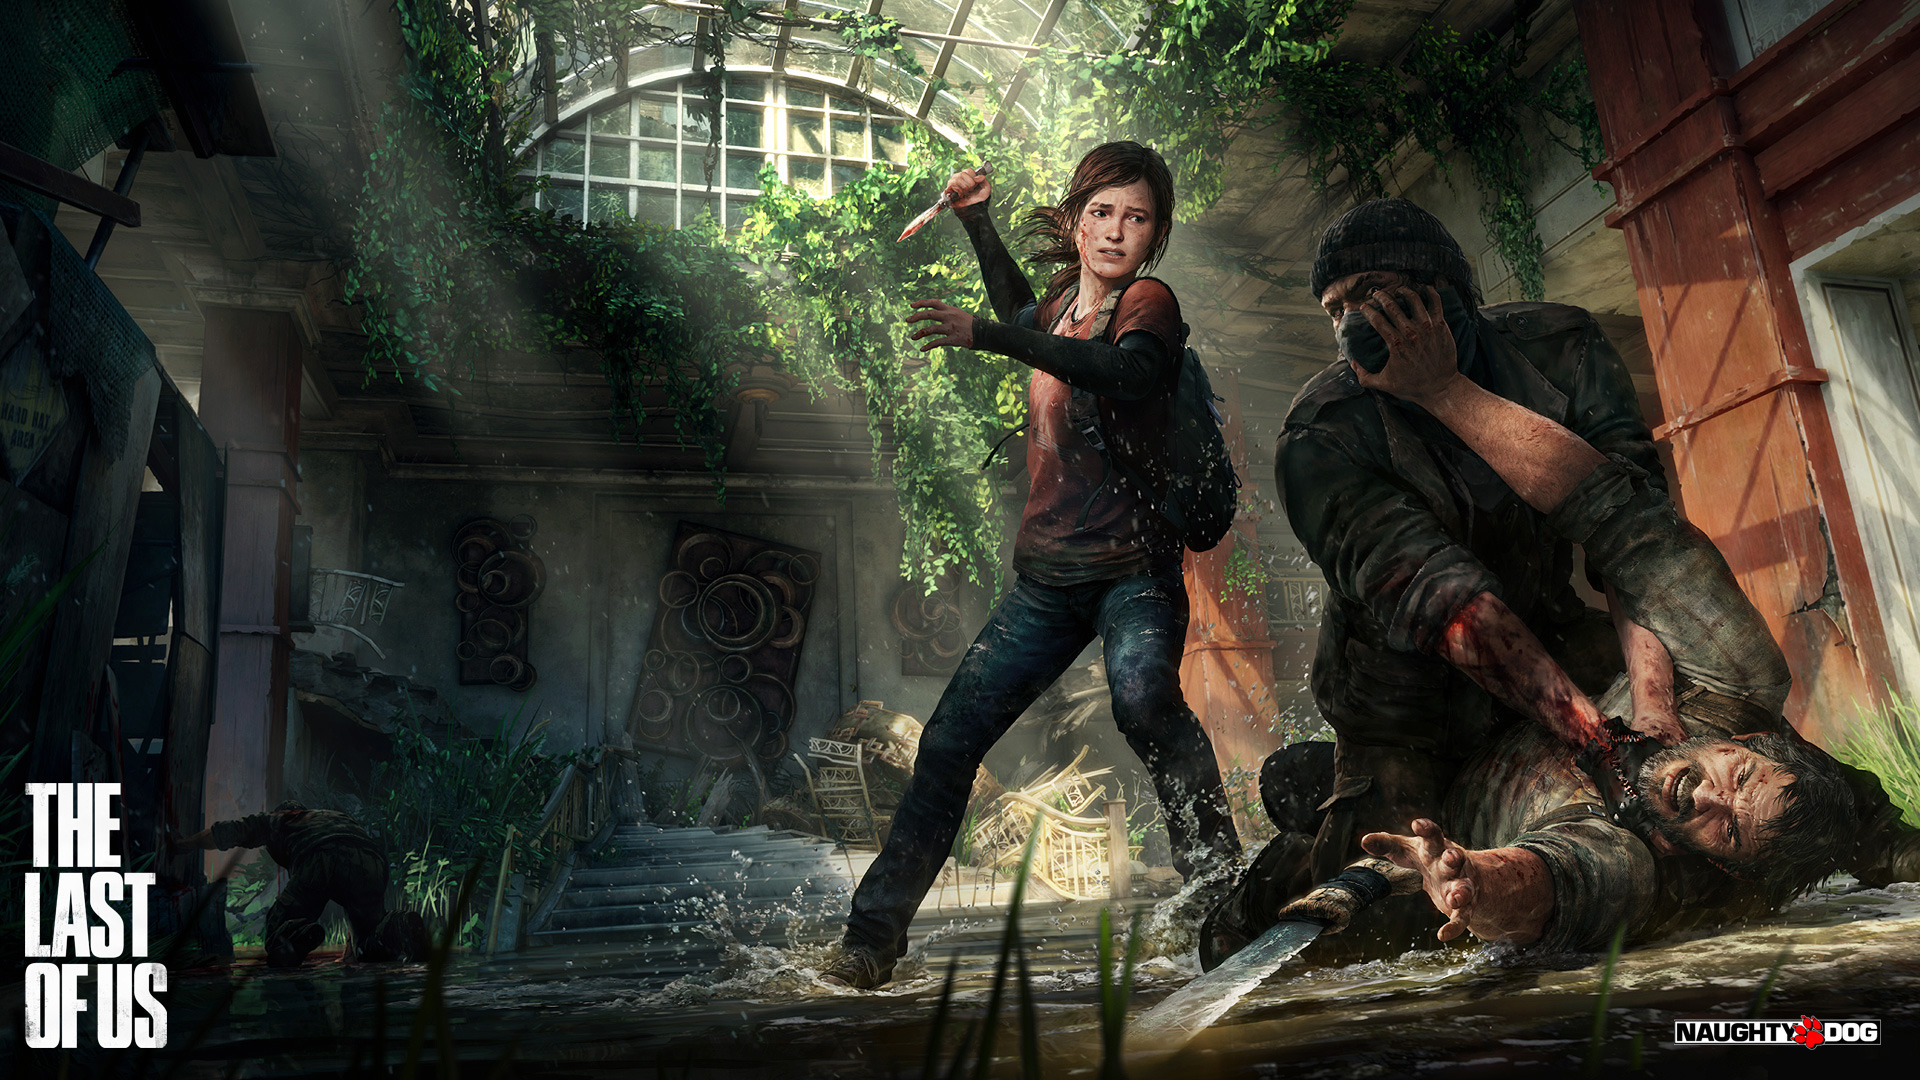 The Last of Us remake is coming to PS5, according to report